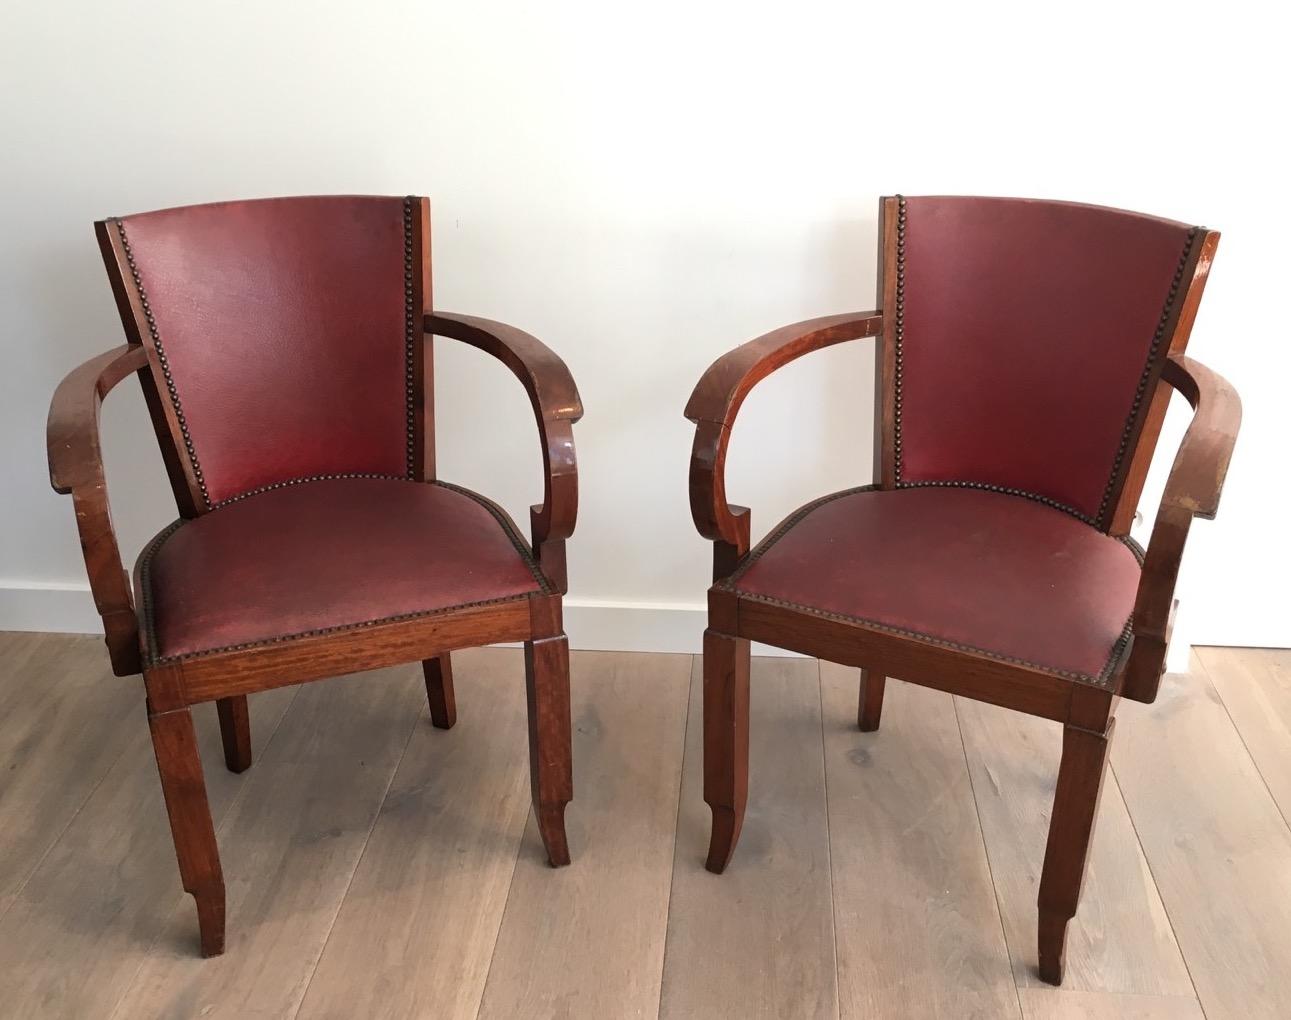 Rare Set of 8 Mahogany and Faux-Leather Art Deco Armchairs, French, circa 1930 In Good Condition For Sale In Marcq-en-Barœul, Hauts-de-France